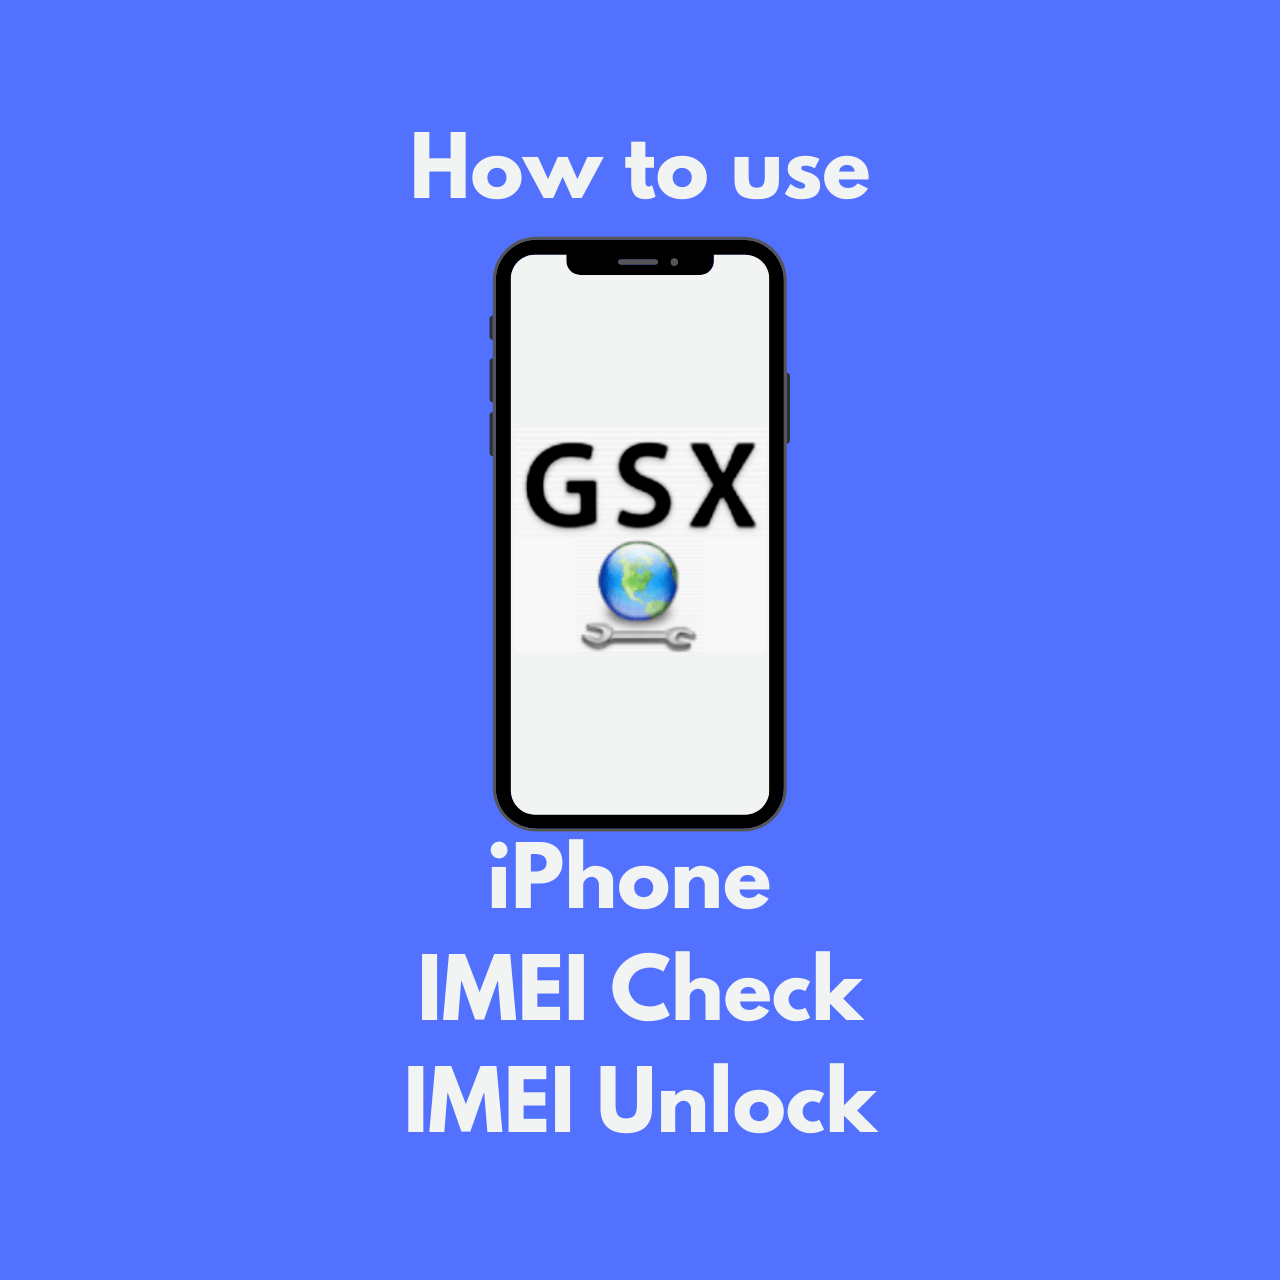 How to use Apple GSX service for iPhone IMEI check and Unlock?